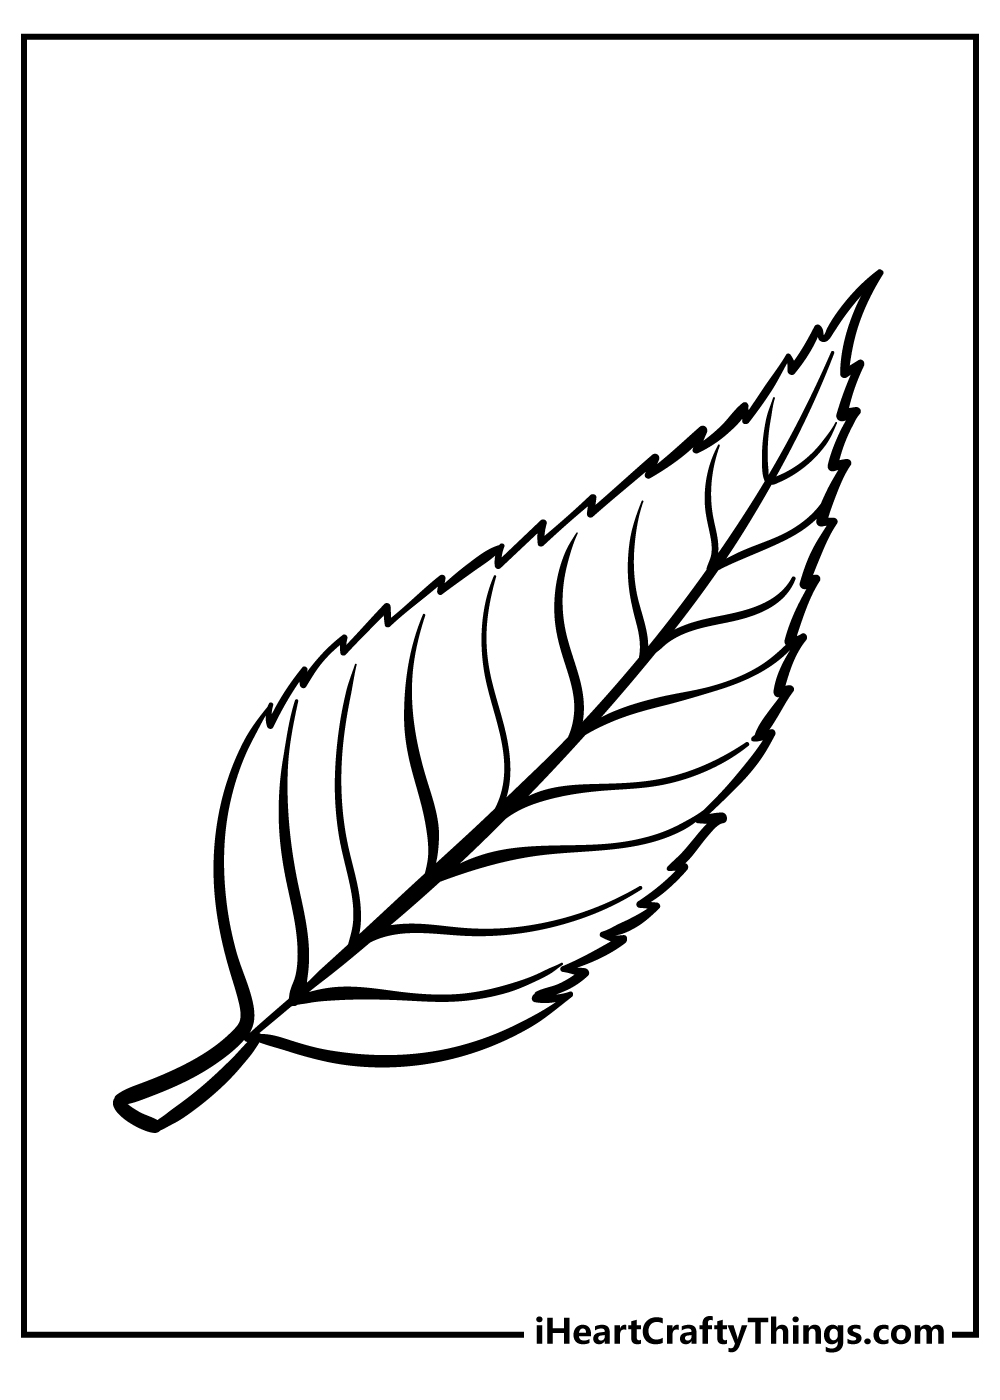 Coloring Pages Leaf